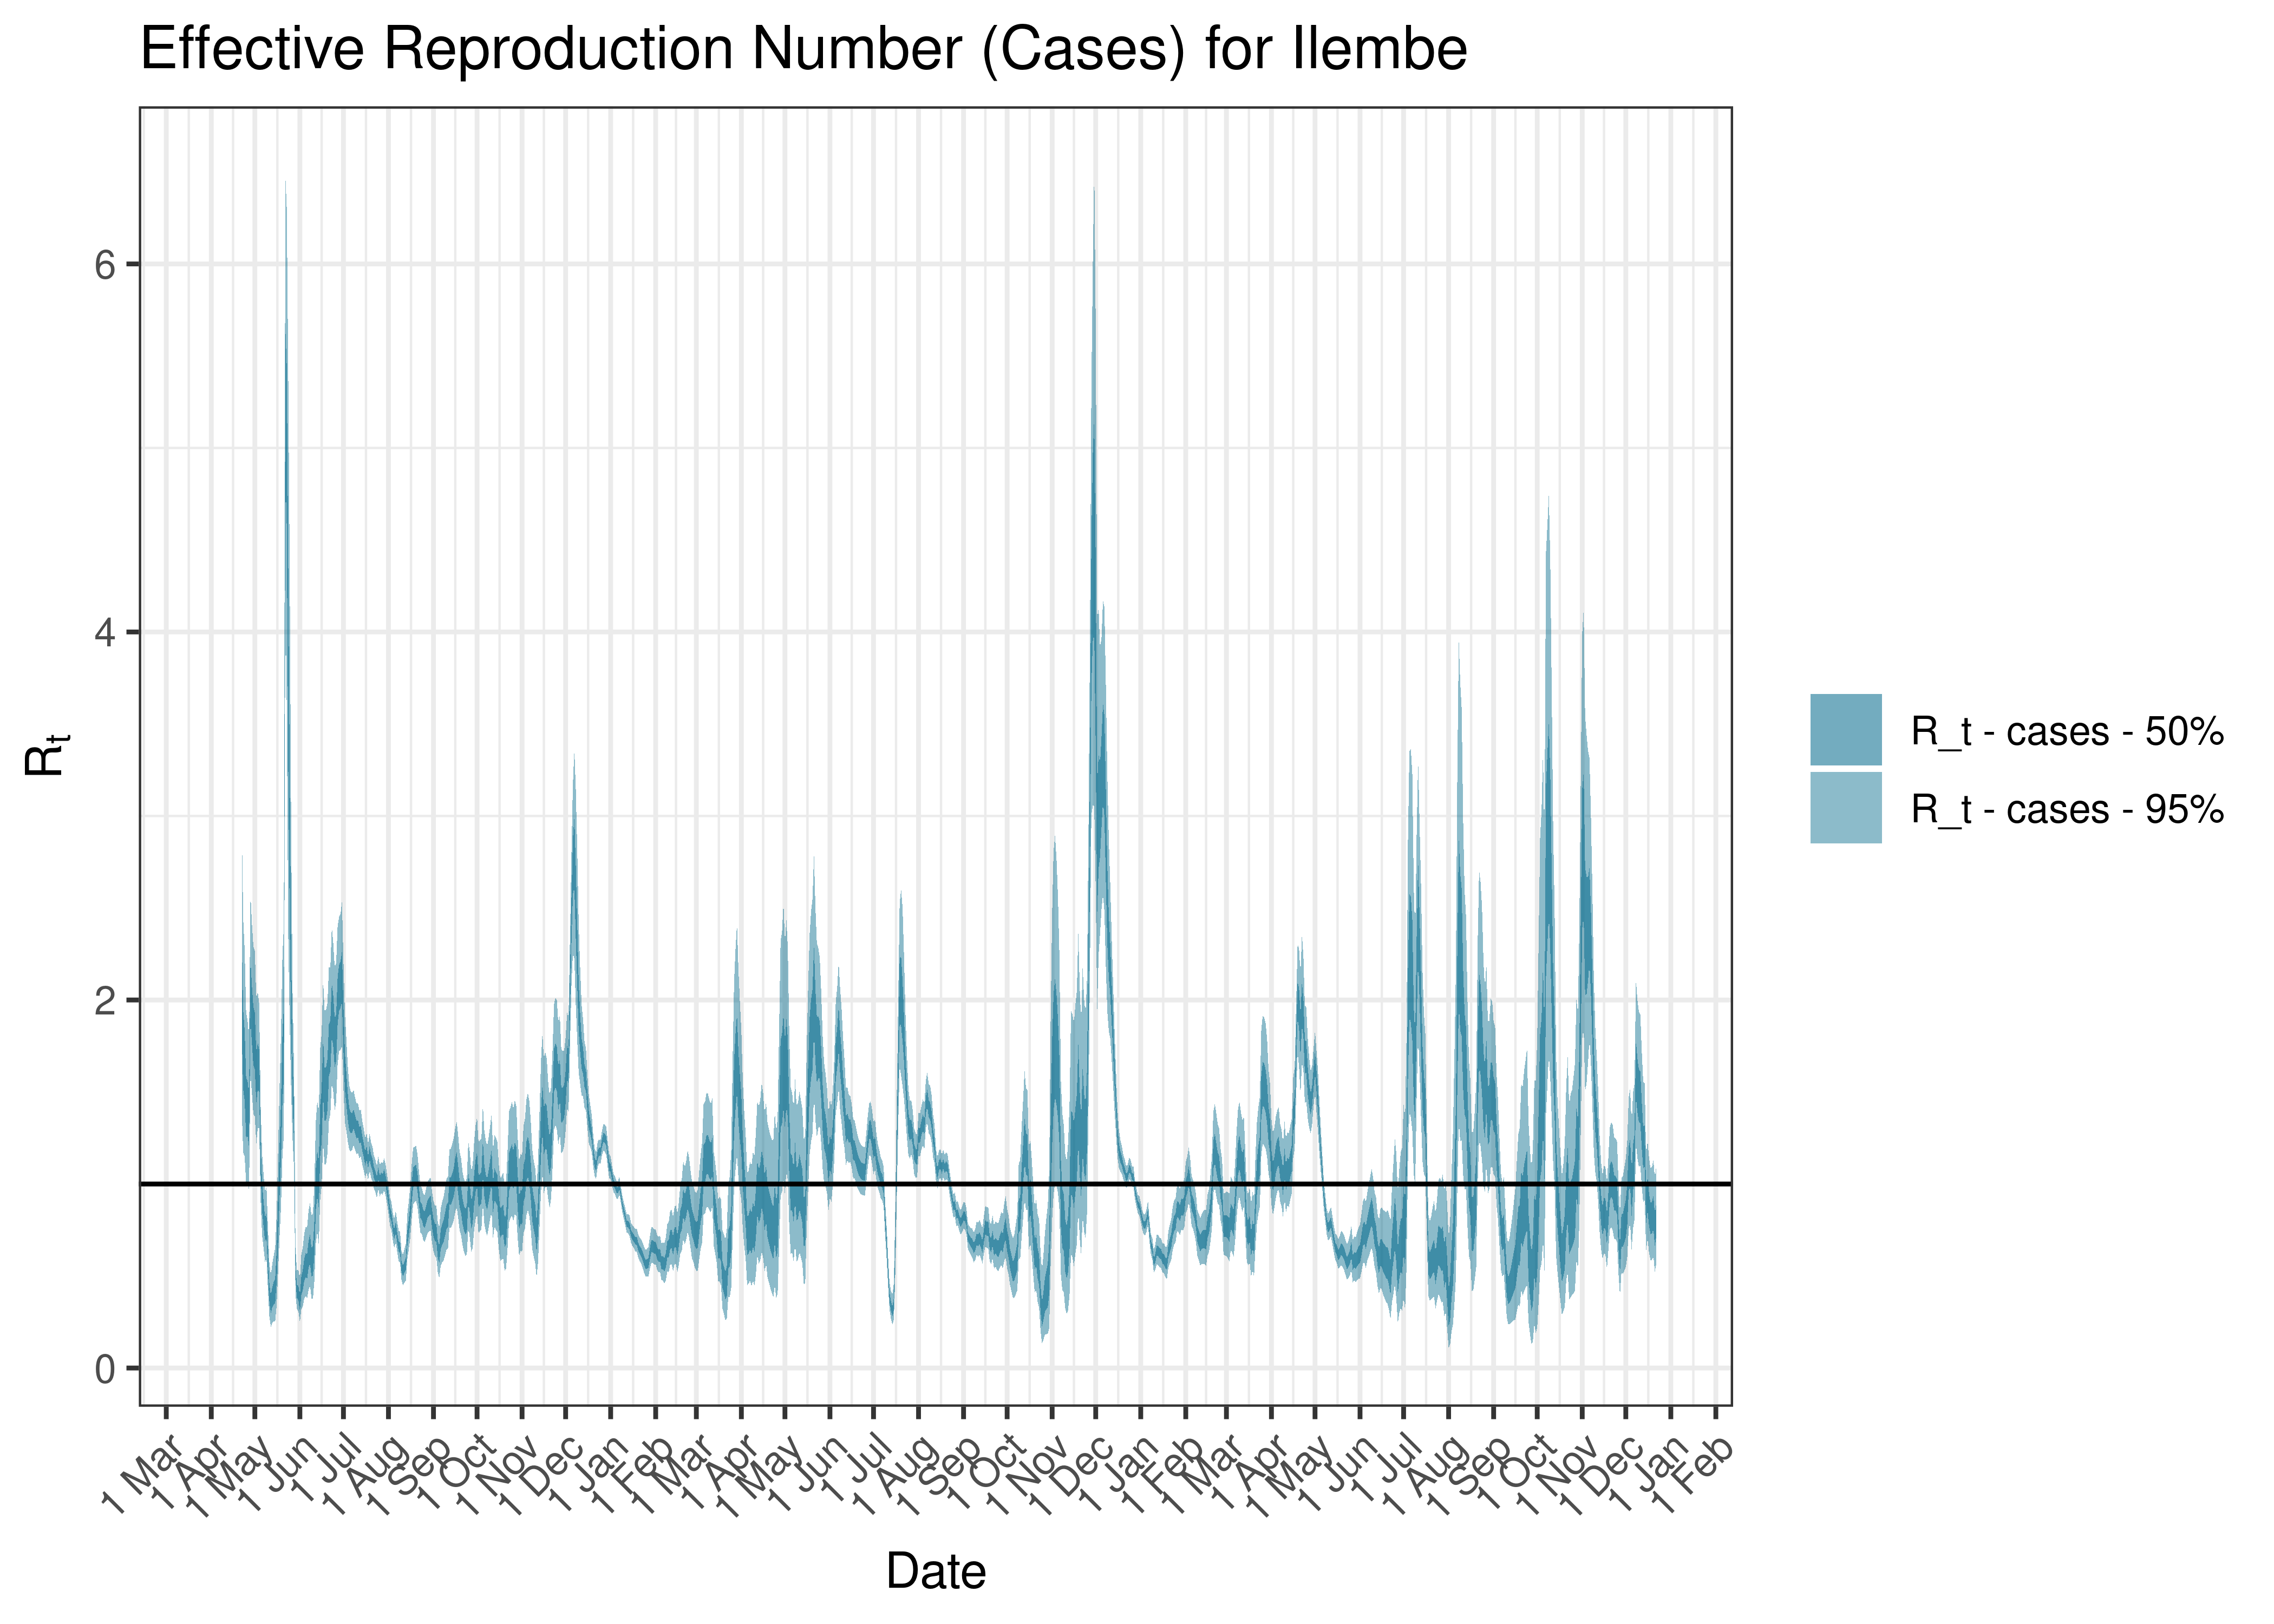 Estimated Effective Reproduction Number Based on Cases for Ilembe since 1 April 2020